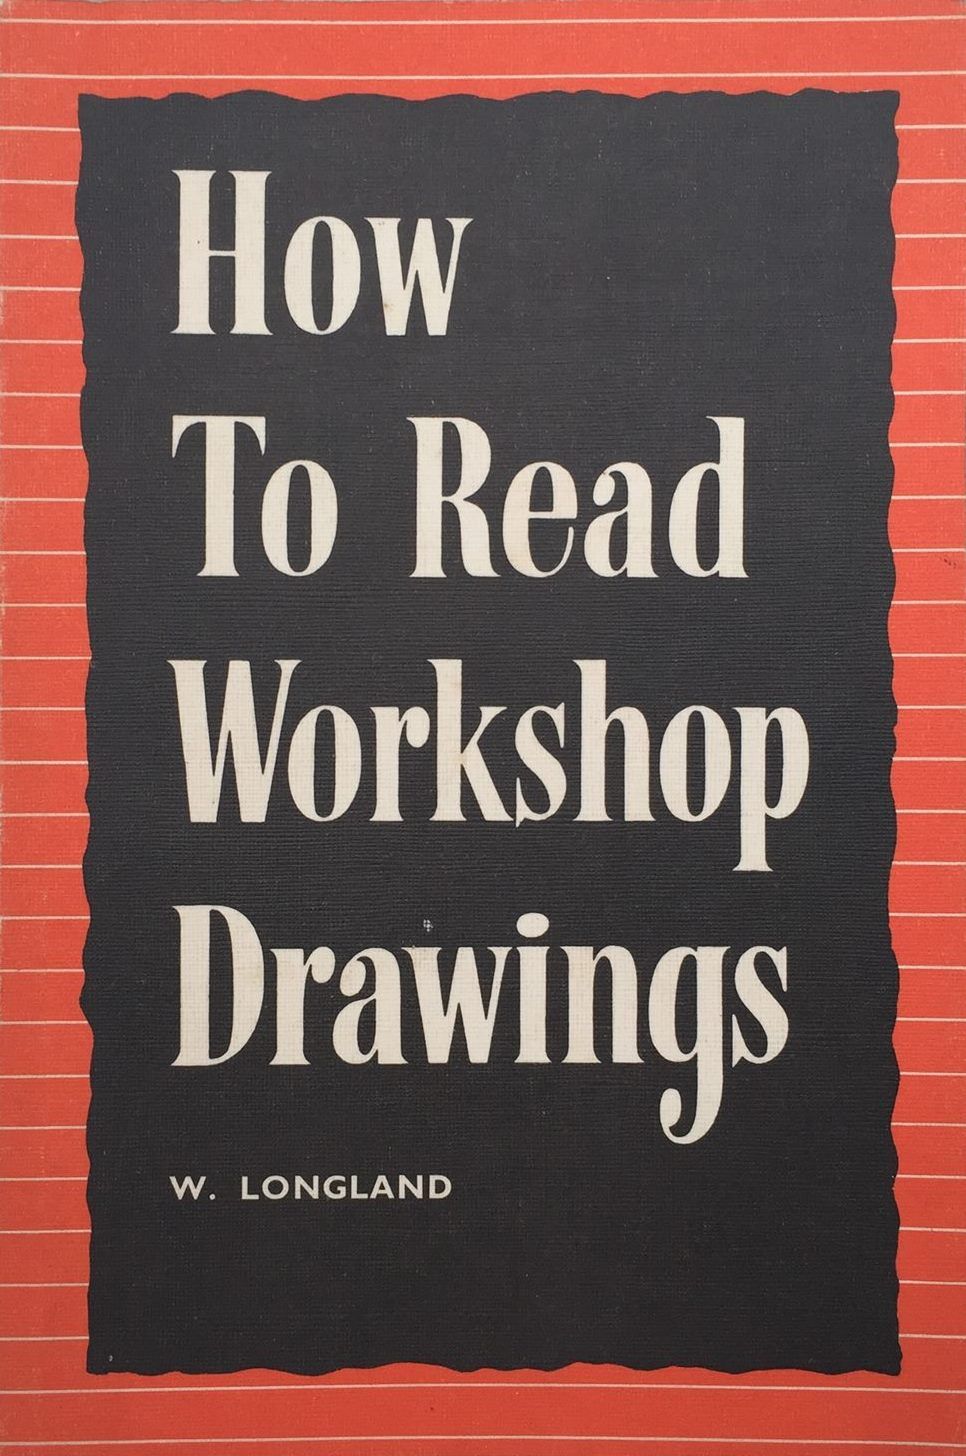 How To Read Workshop Drawings